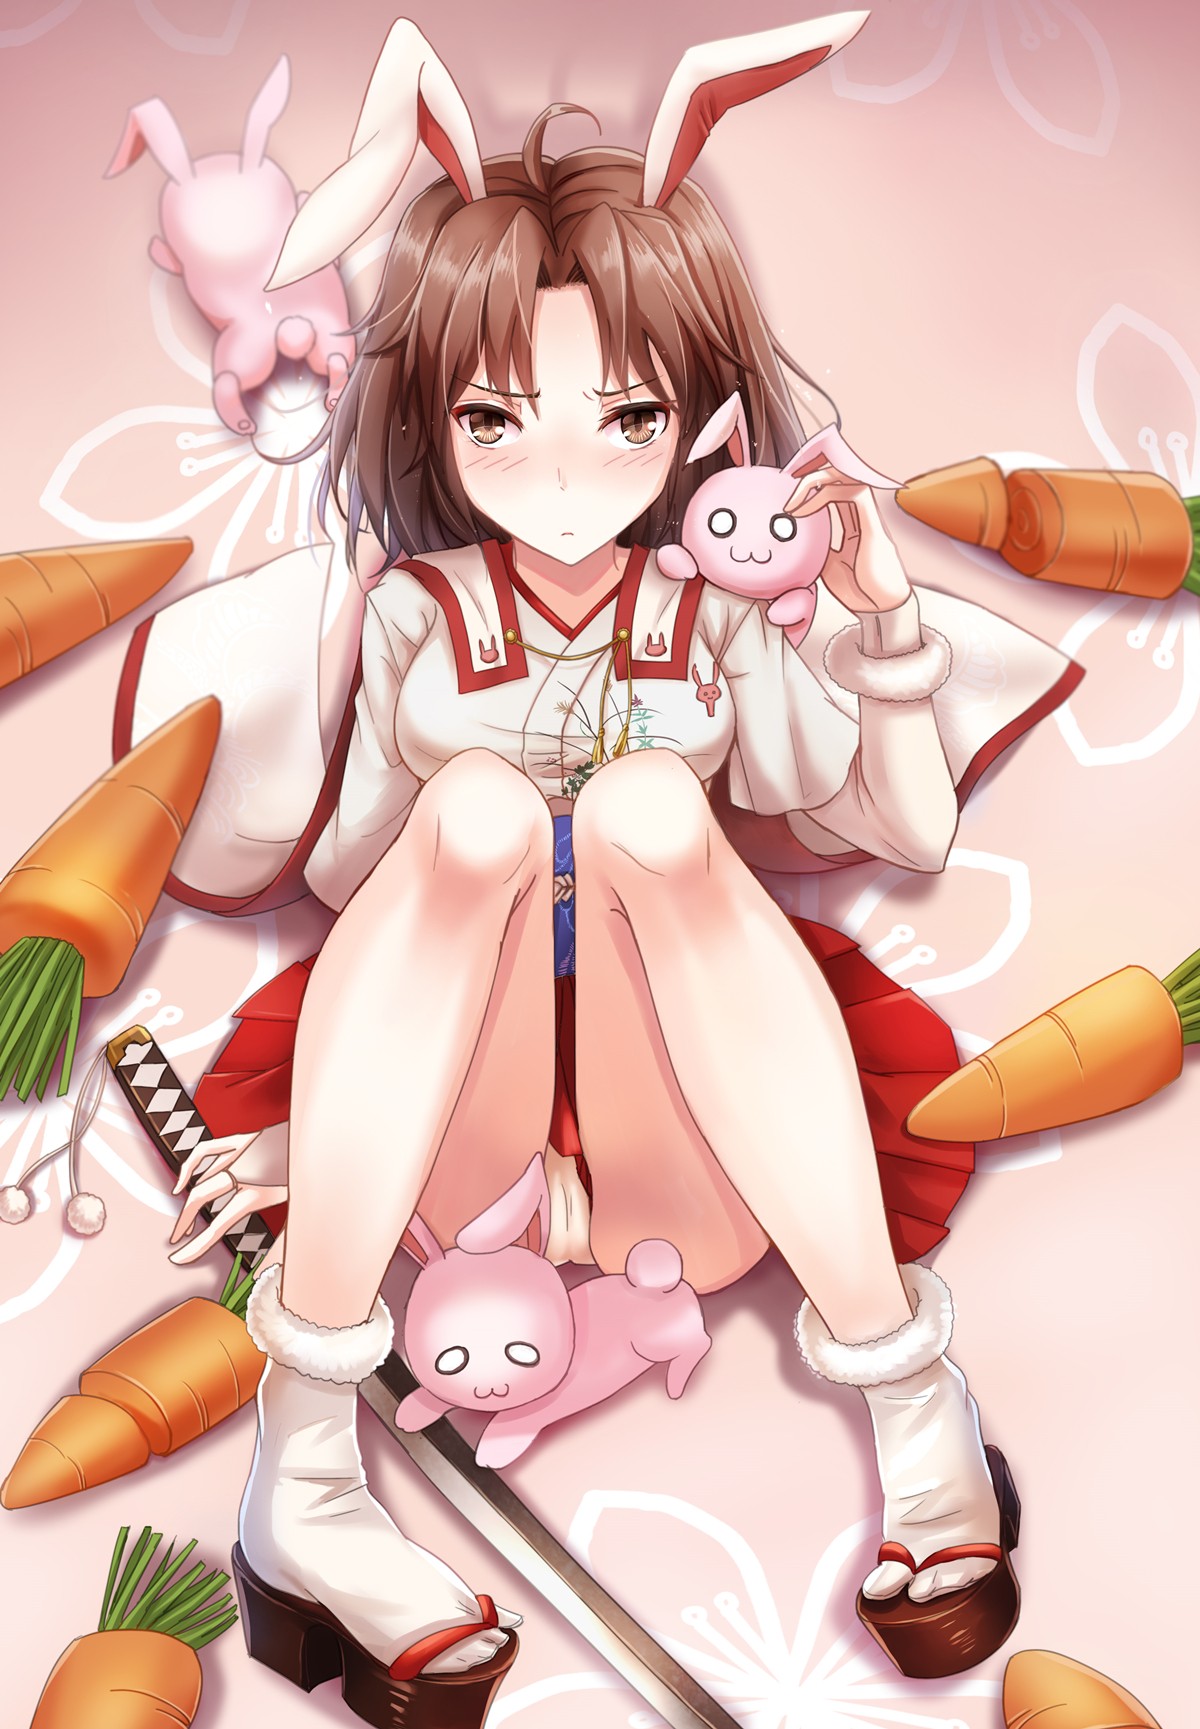 Anime 1200x1729 anime anime girls Fate/Grand Order bunny ears legs long hair brown eyes Pixiv knees thighs carrots food vegetables bunny girl rabbits animals mammals looking at viewer brunette